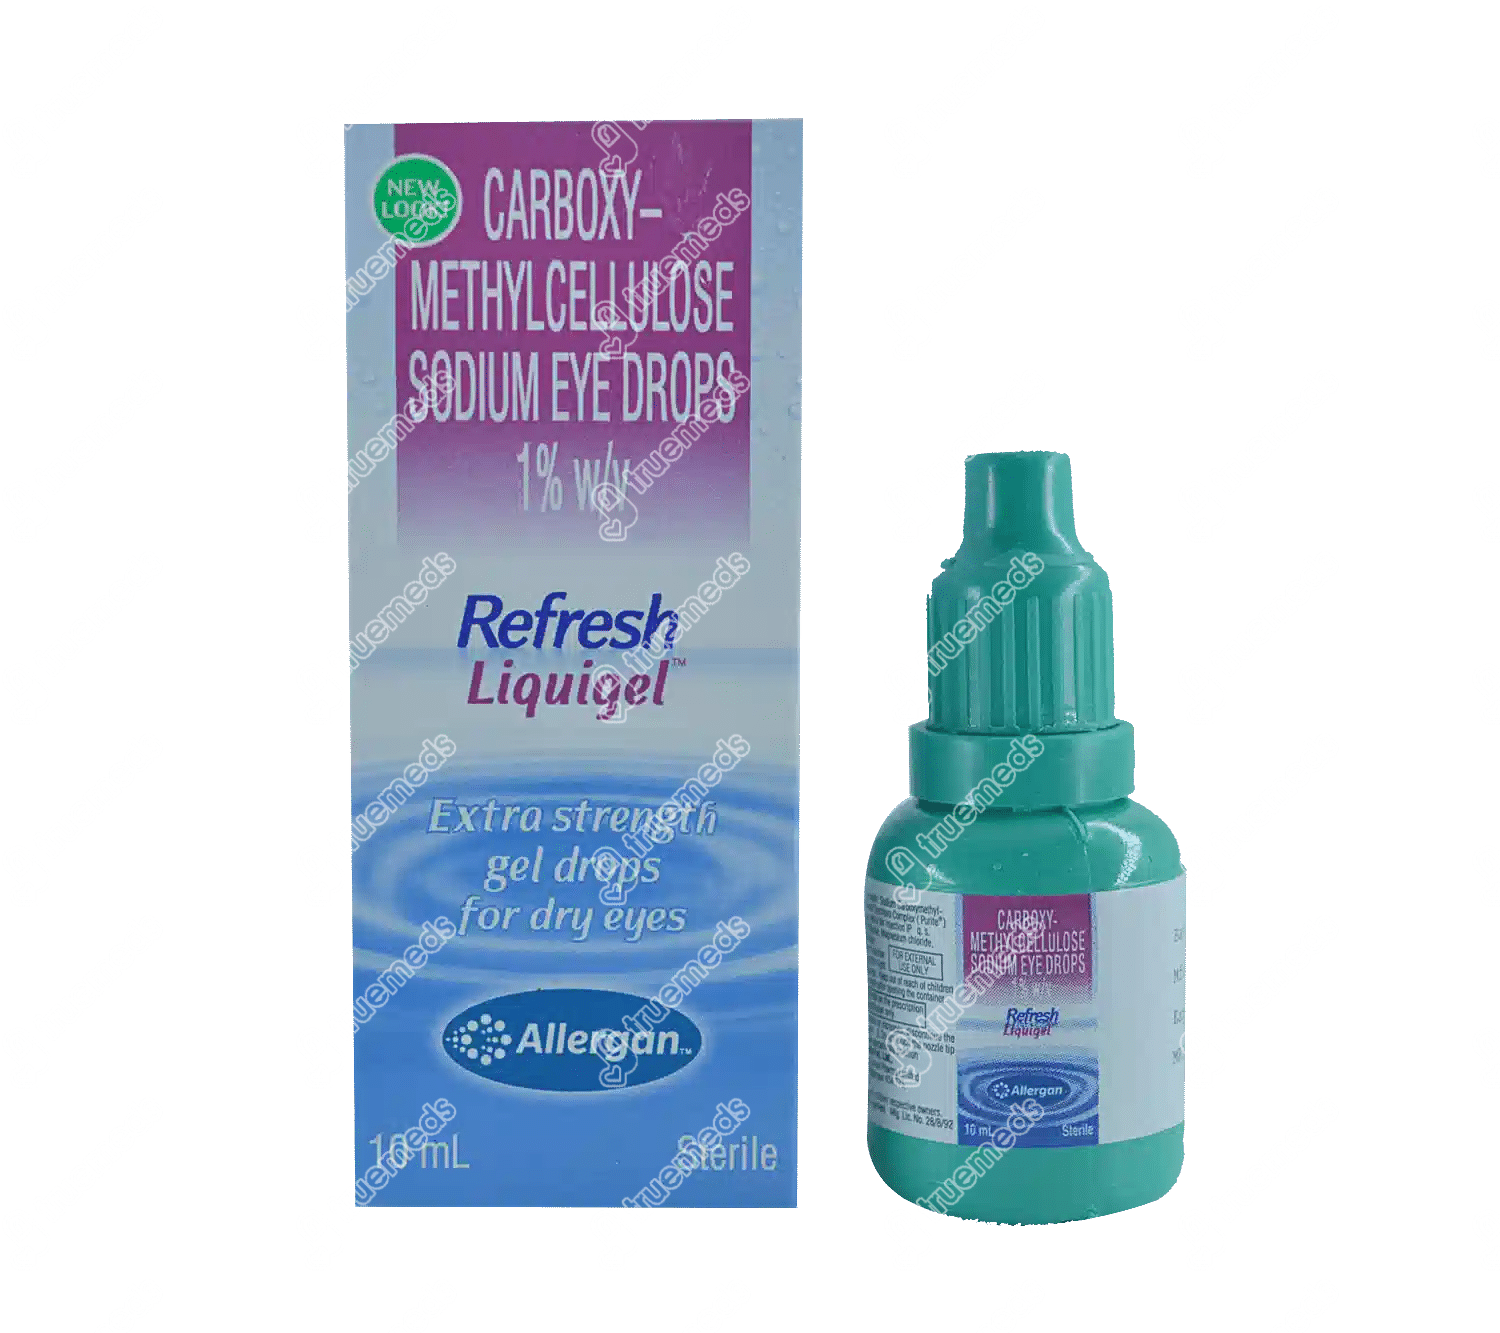 Refresh Liquigel 1% Eye Drops - Uses, Dosage, Side Effects, Price